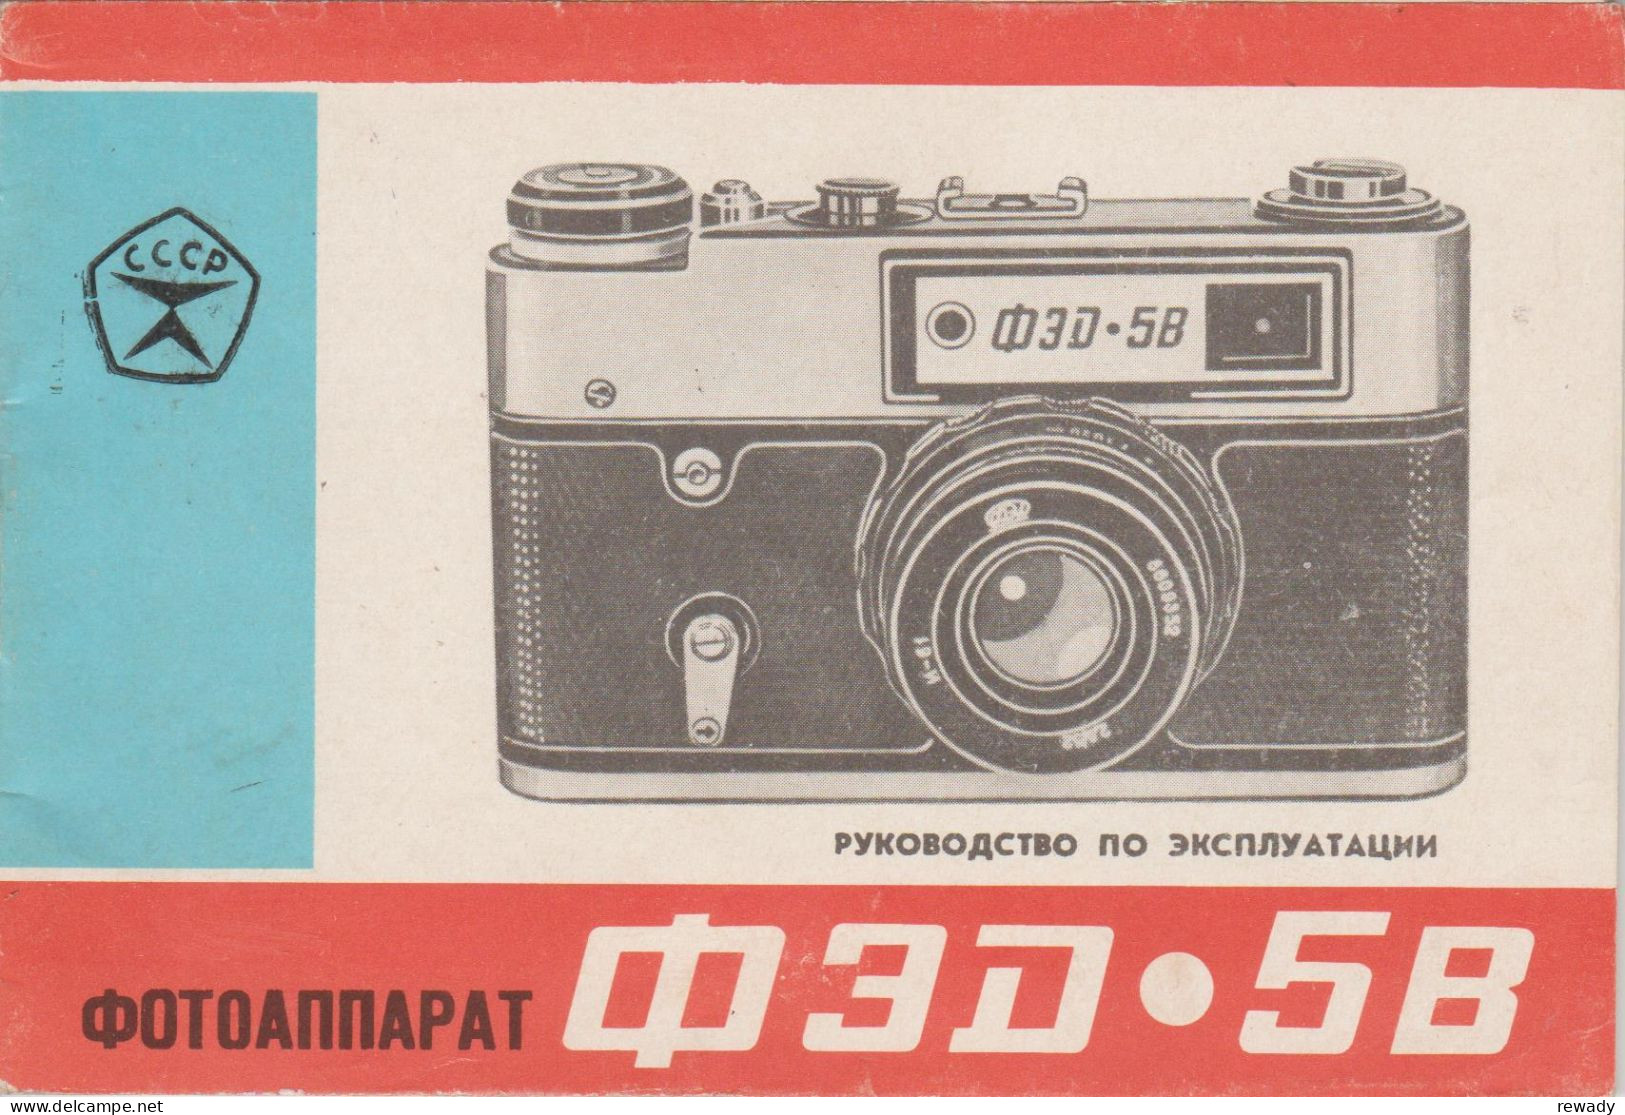 CCCP - Russia - Фотоаппарат ФЭД-5В - Fotoaparat FED-5V - Publicite - Advertising - Supplies And Equipment